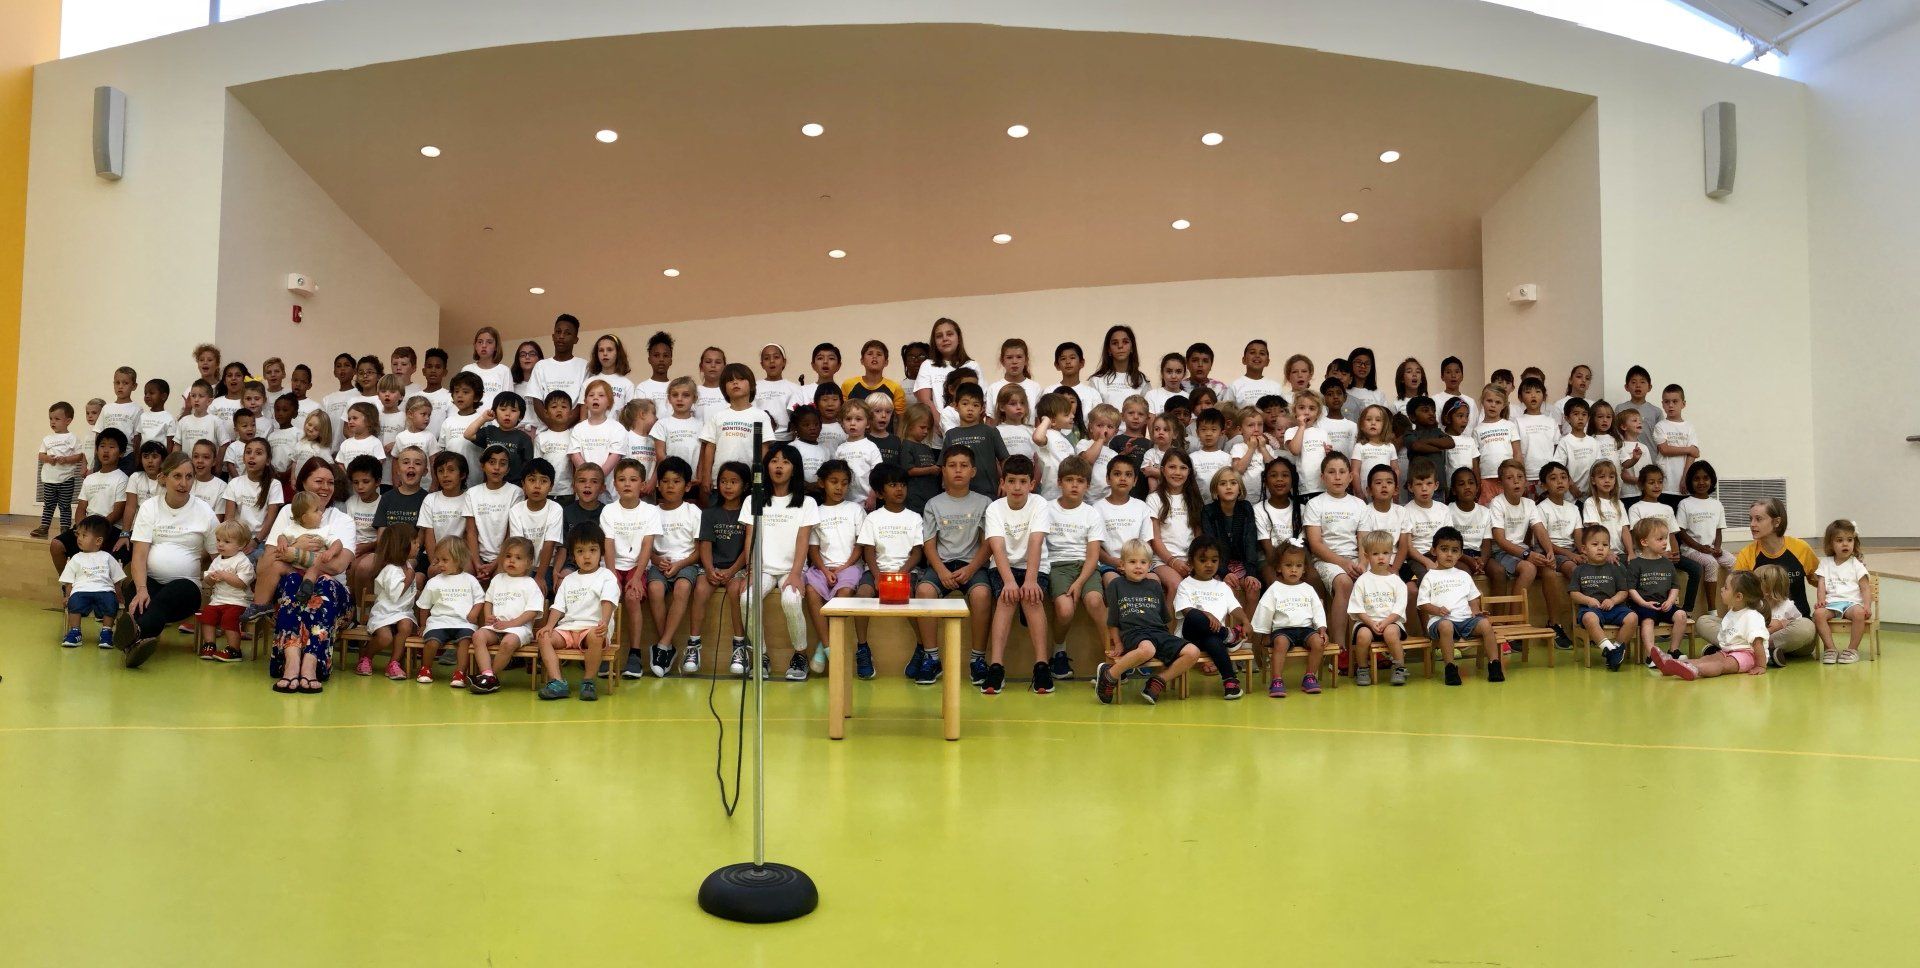 Diverse Montessori student population during an assembly